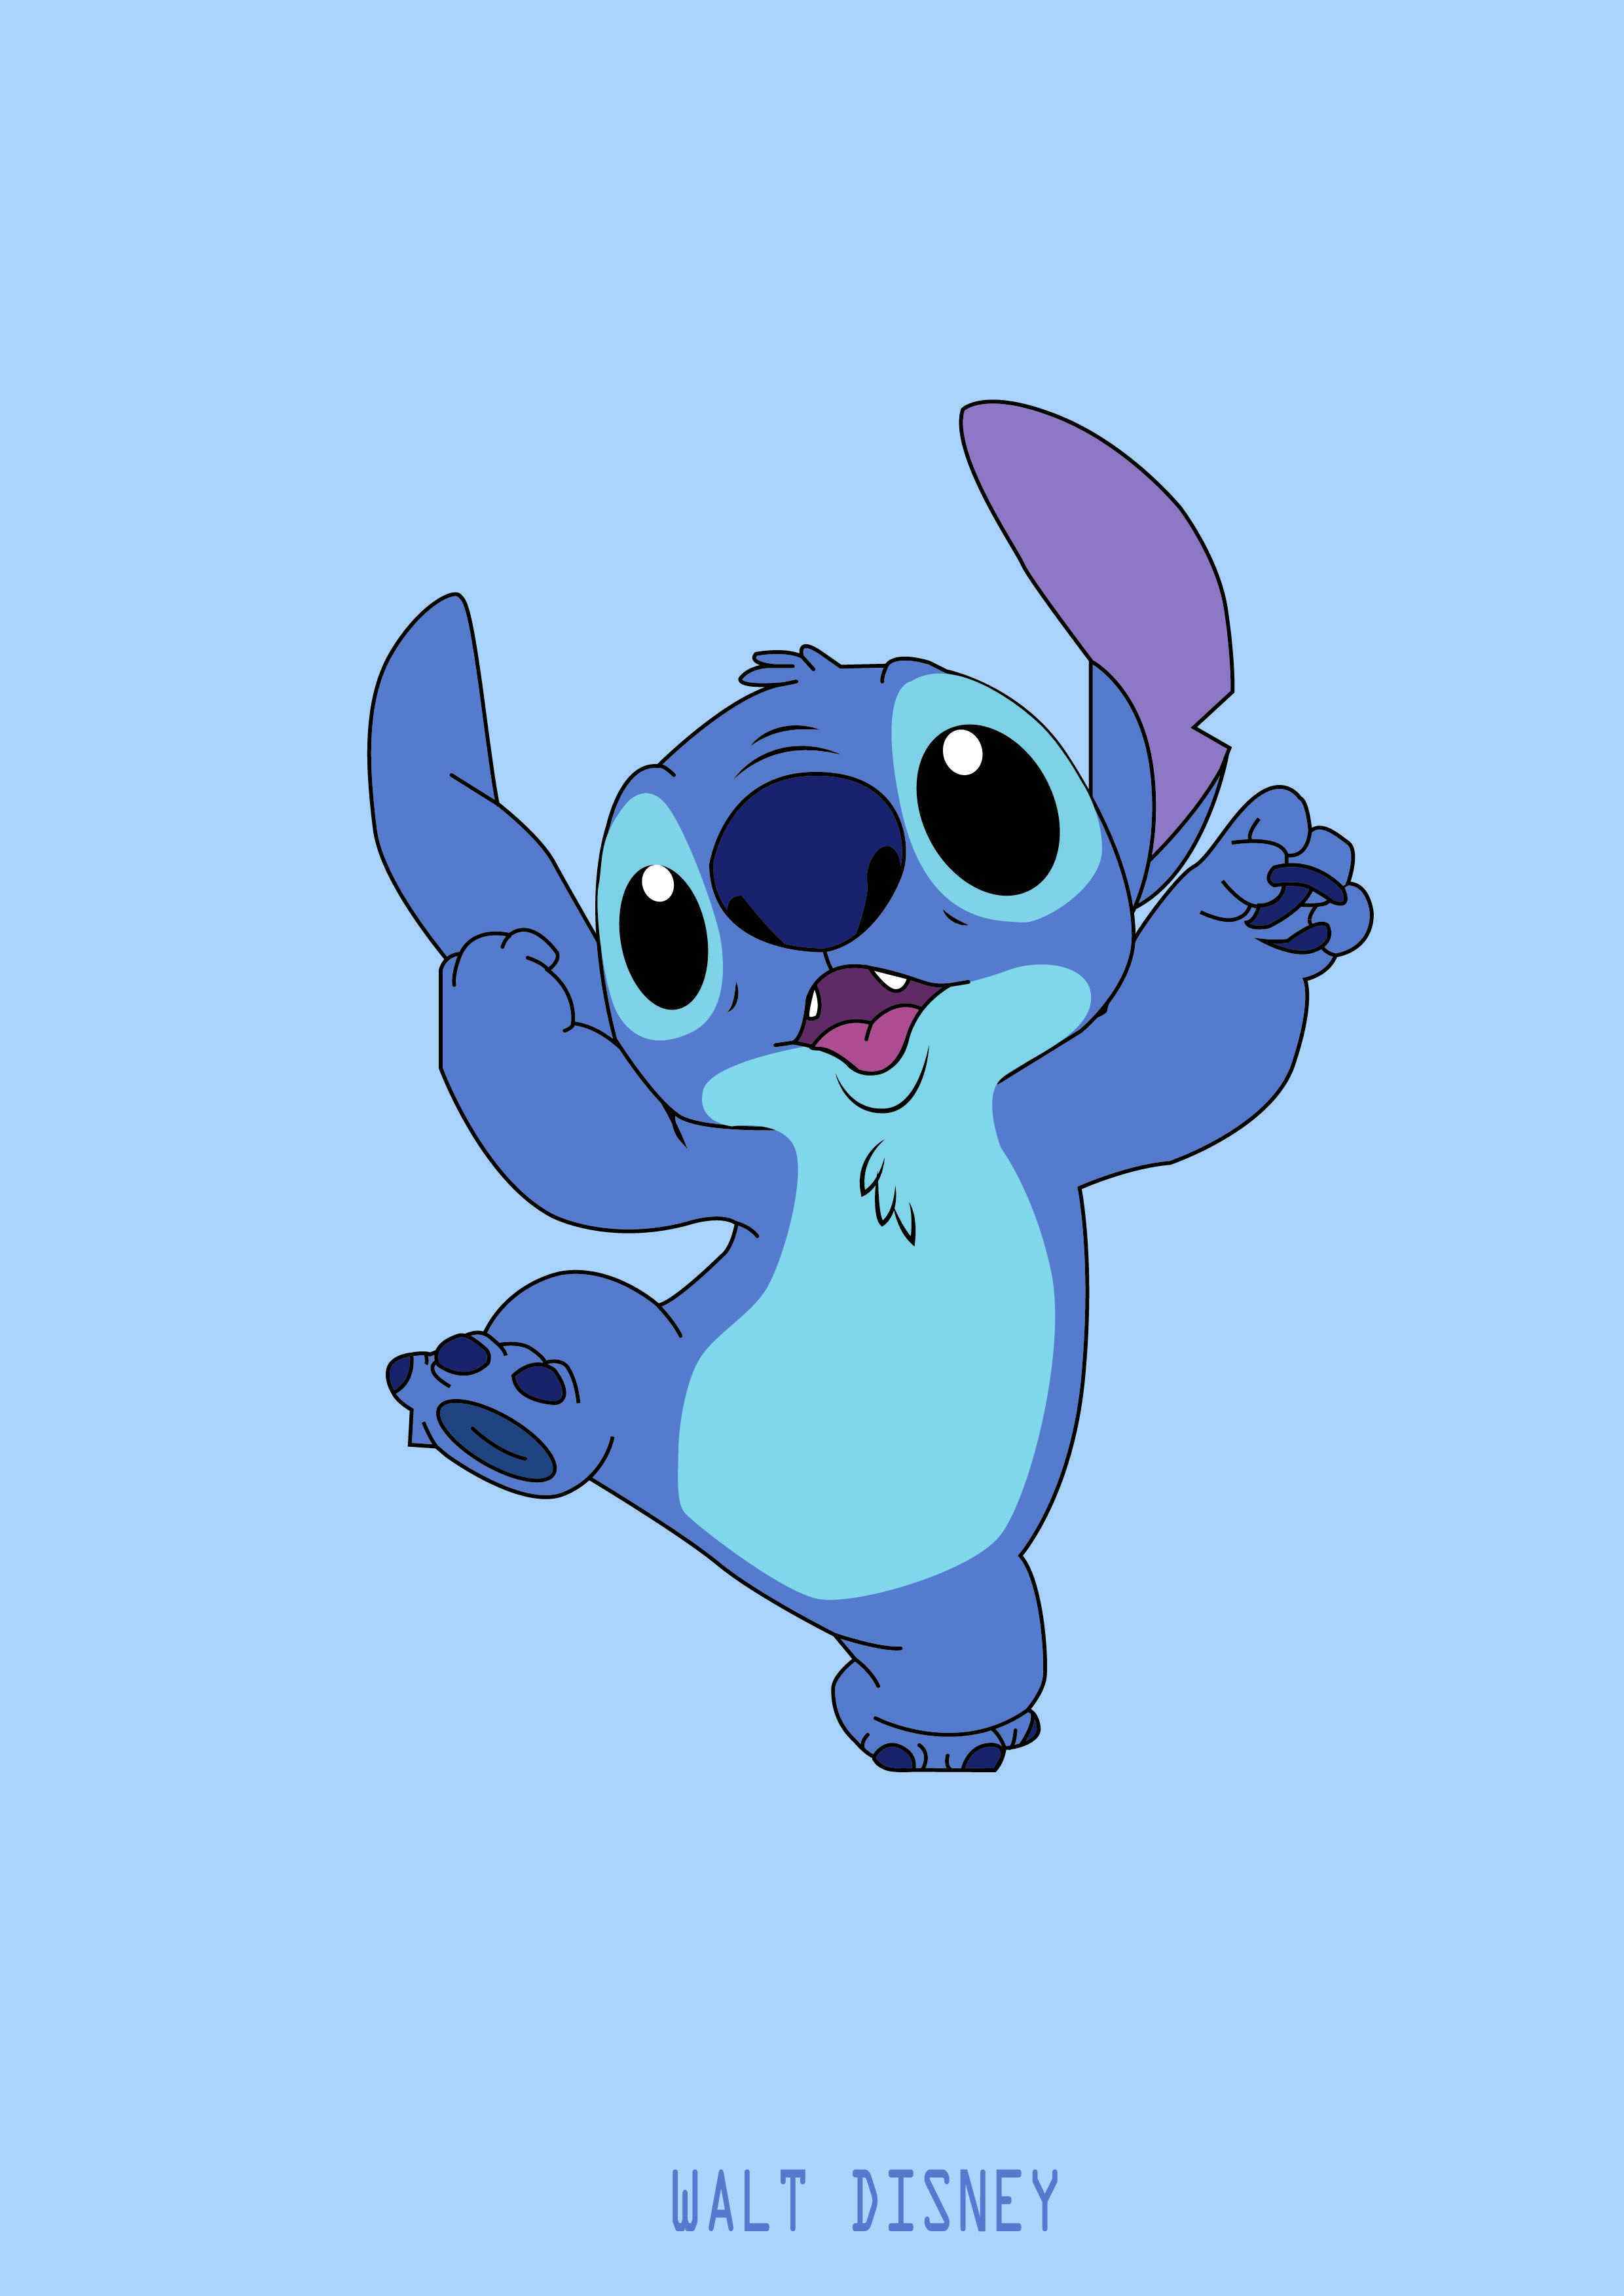 Aesthetic Stitch Disney Wallpapers Top Free Aesthetic Stitch Disney